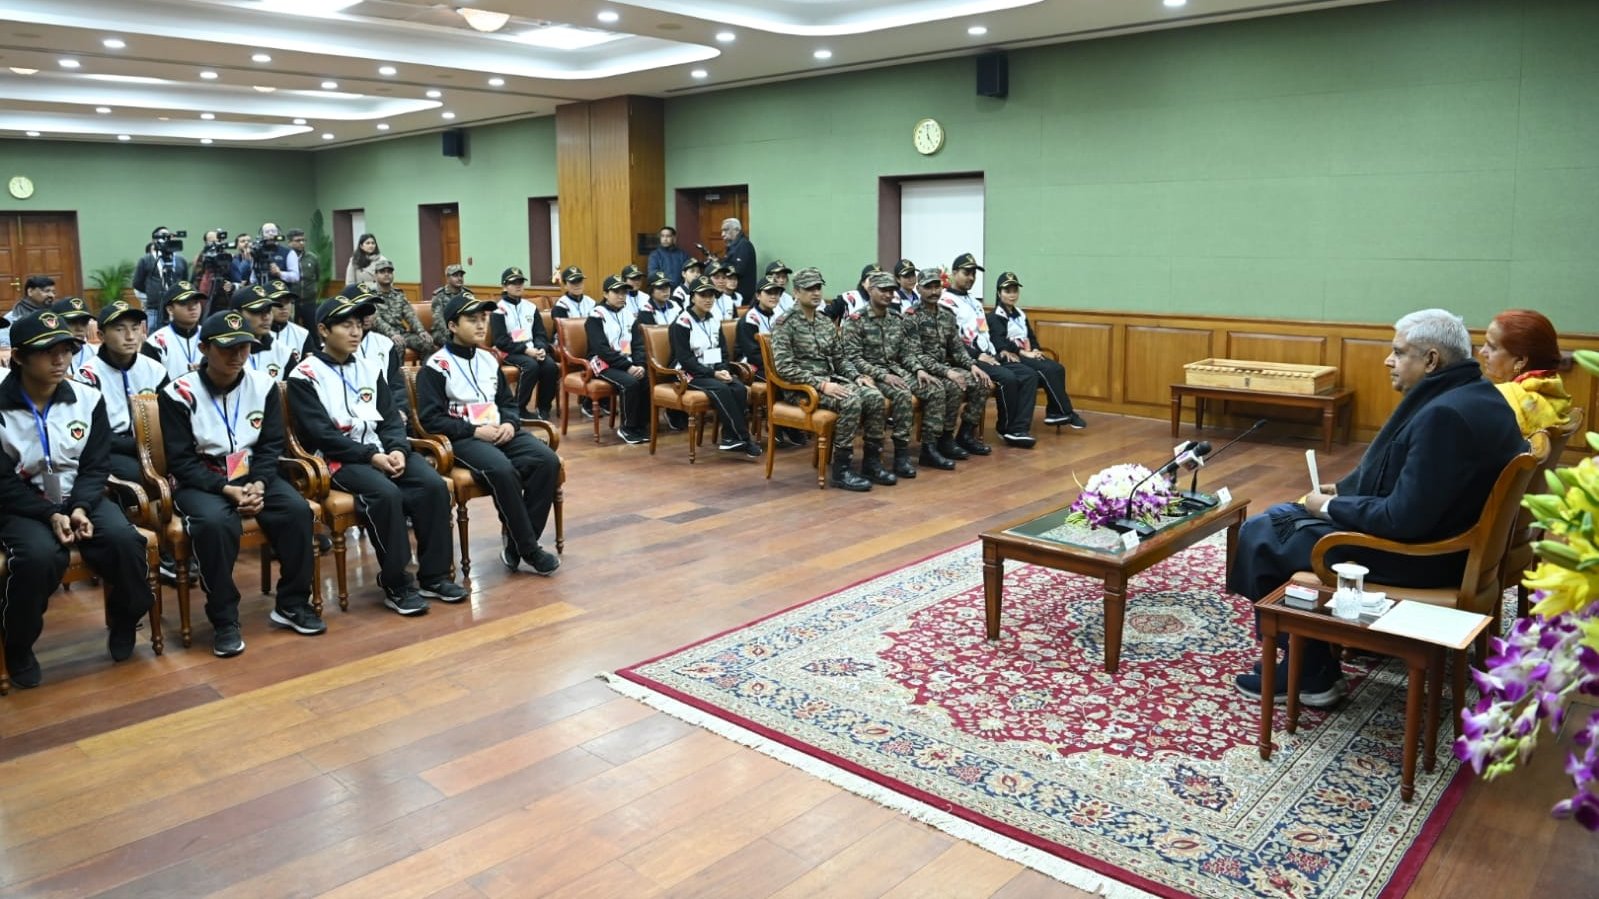 The Vice-President, Shri Jagdeep Dhankhar interacting with a delegation of students from Menchuka Valley, Arunachal Pradesh, during their National Integration Tour organised by the Indian Army, at Upa-Rashtrapati Nivas in New Delhi on January 18, 2024.